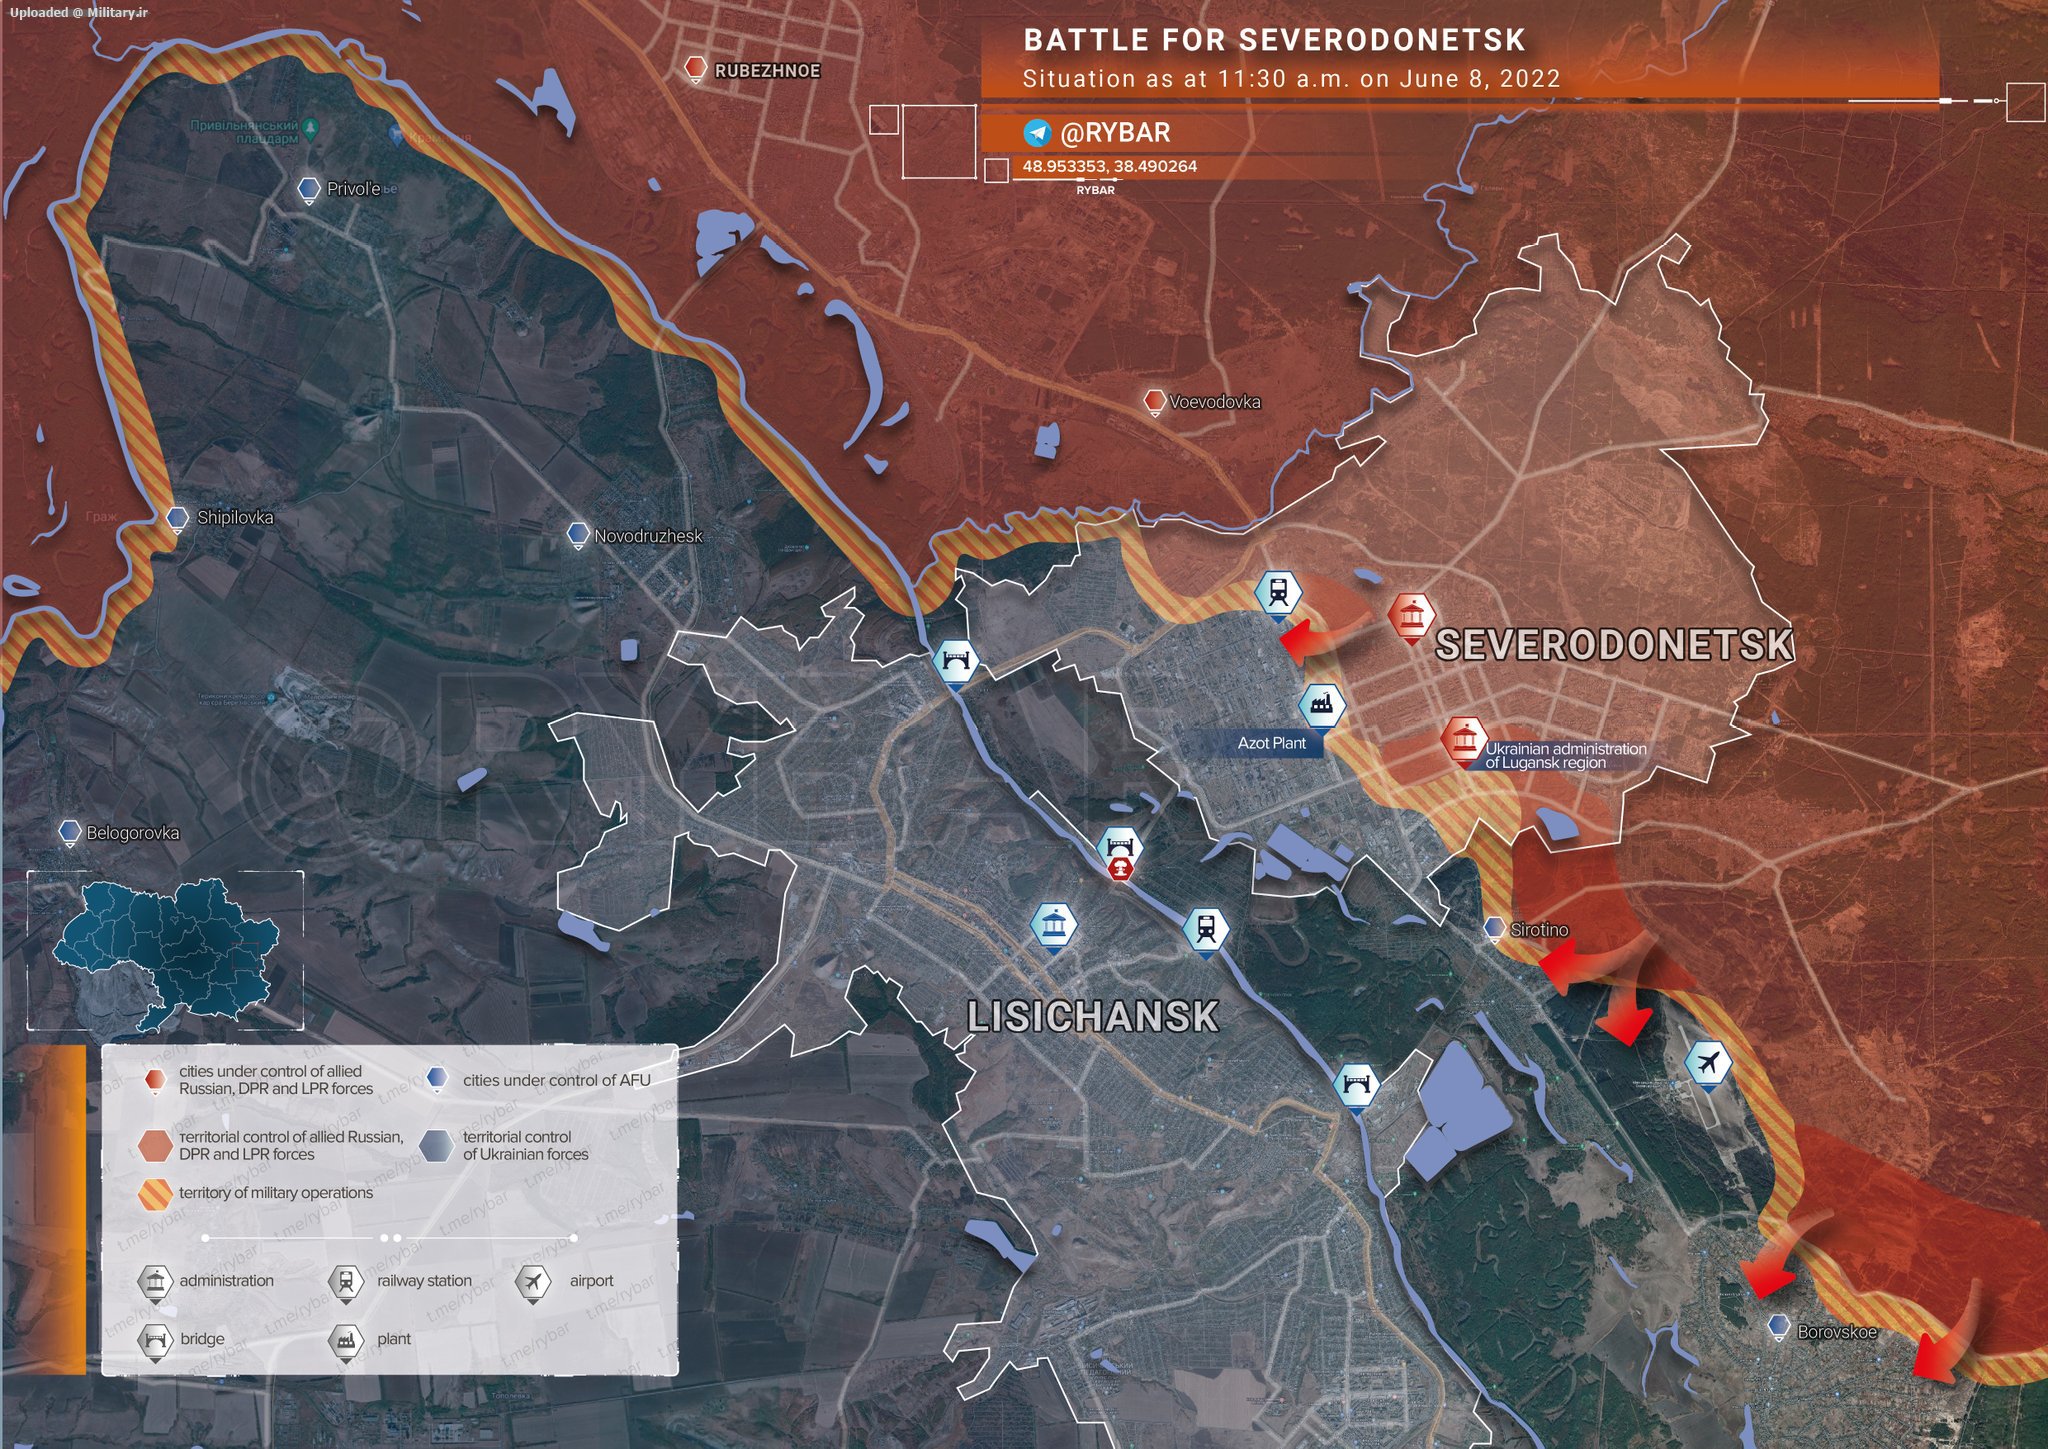 Current_situation_in_Severodonetsk_accor